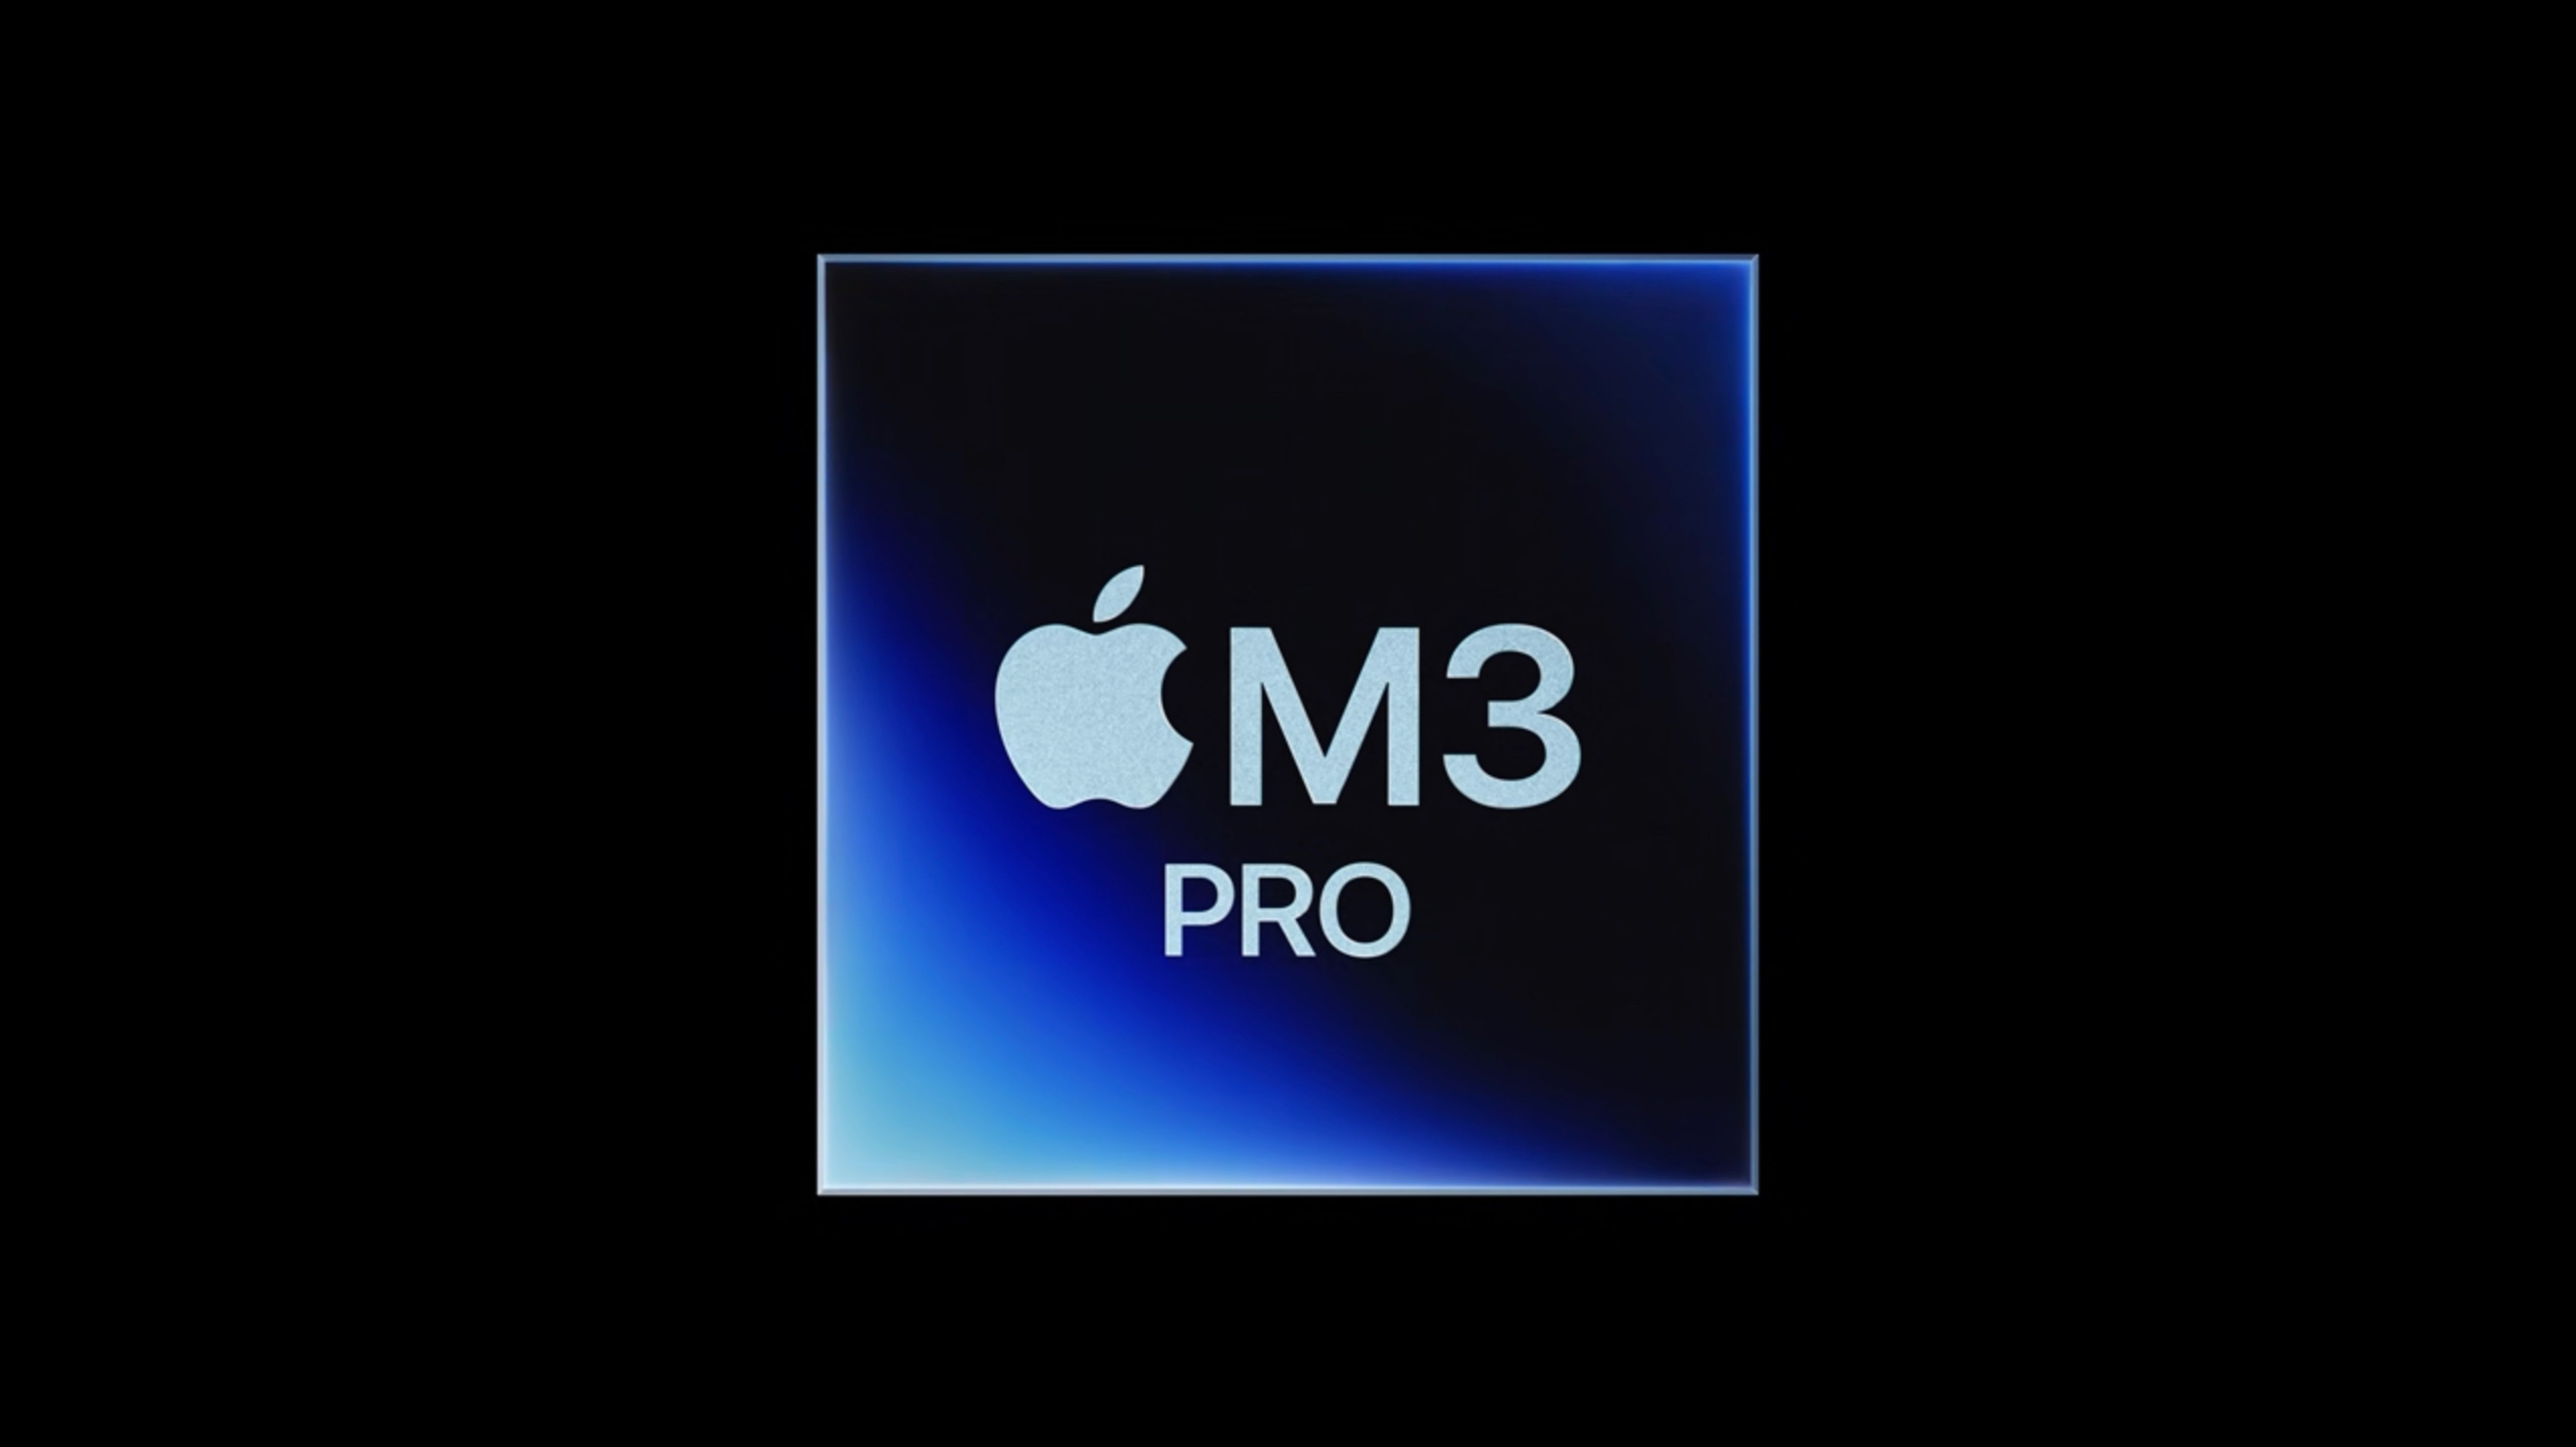 The M3 Pro chip is faster than the M2 Pro in unverified benchmark results